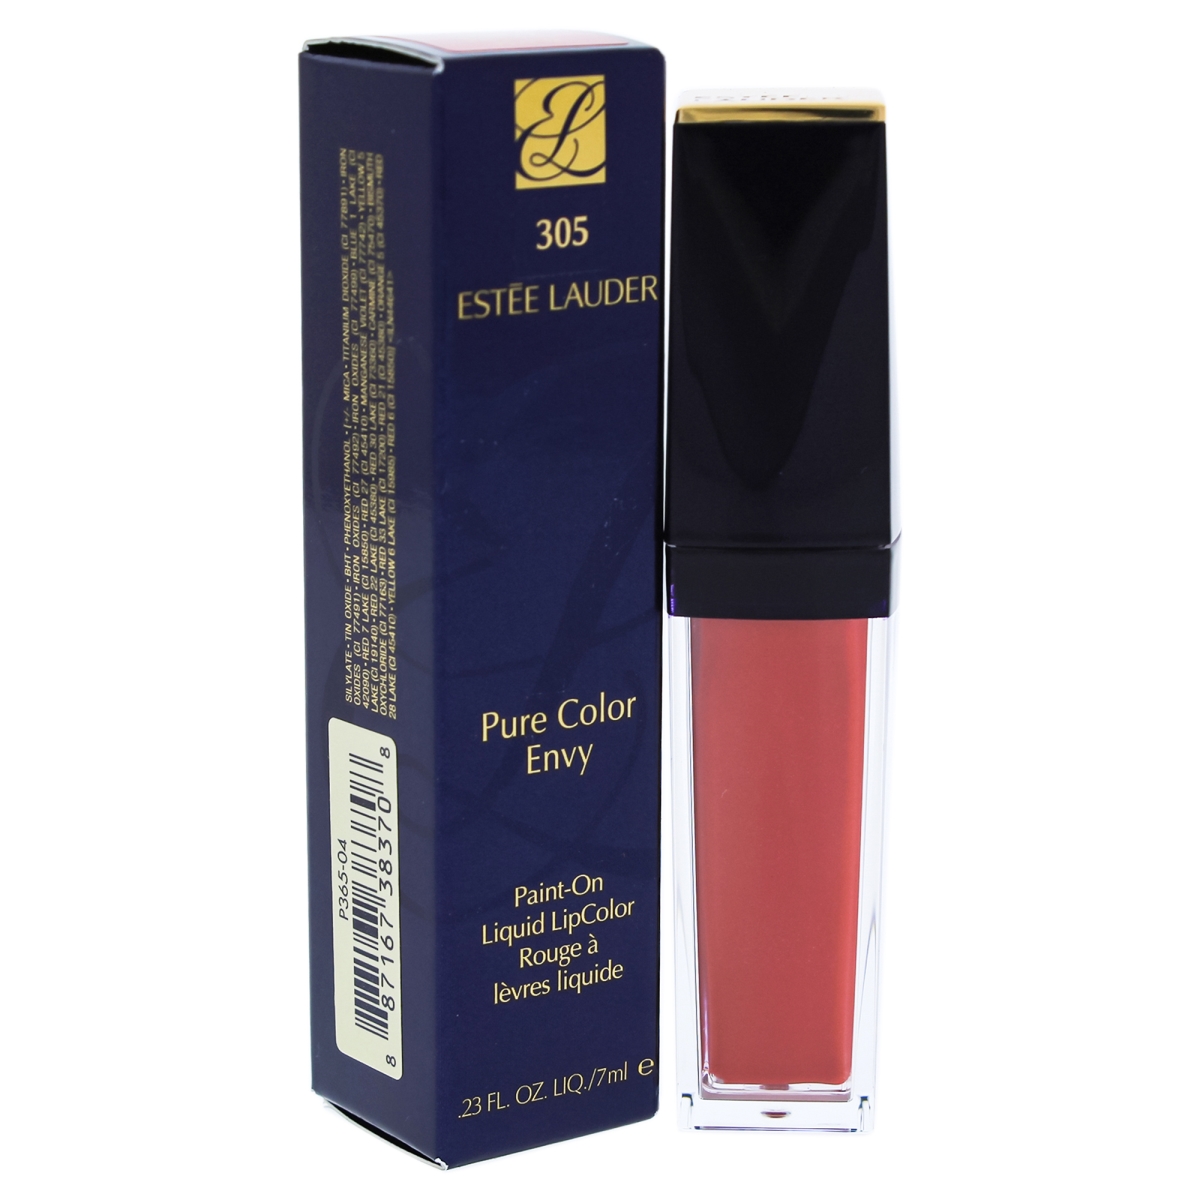 I0086132 0.23 Oz Pure Color Envy Paint-on Liquid Lip Color For Womens - 305 Patently Peach